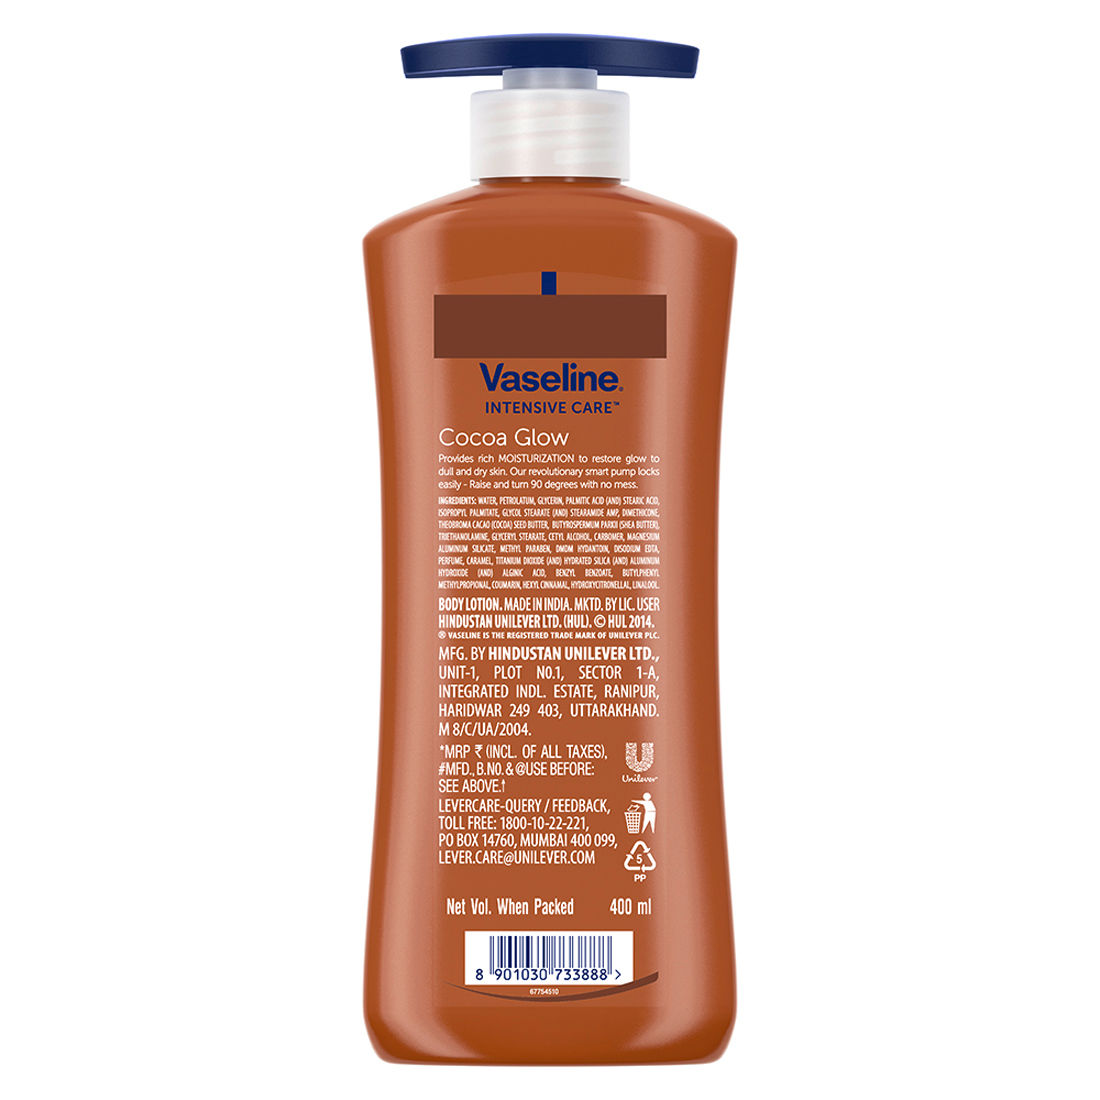 Vaseline Intensive Care Cocoa Glow Body Lotion, 400 ml, Pack of 1 